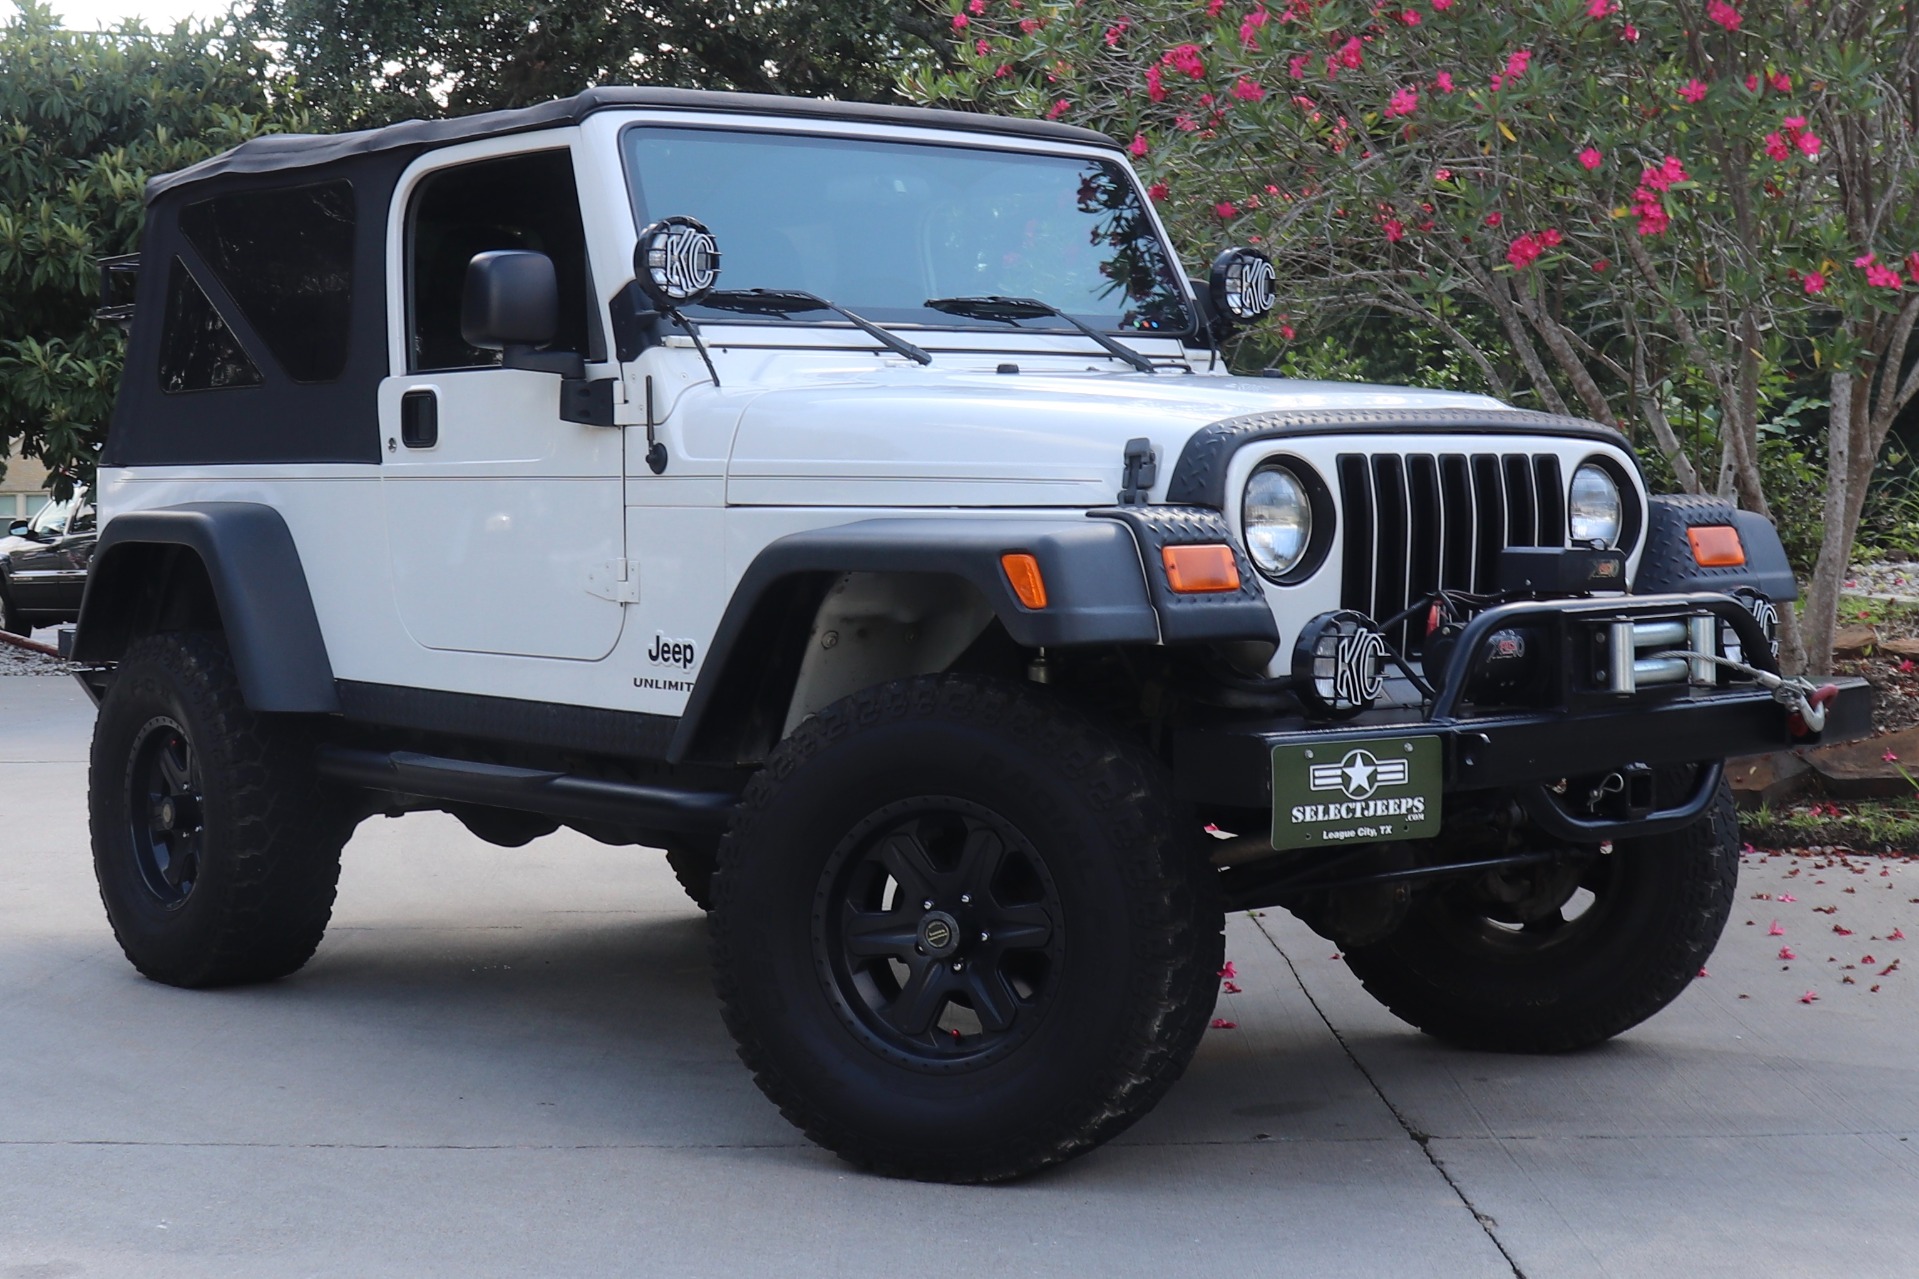 Used 2005 Jeep Wrangler Unlimited For Sale ($25,995) | Select Jeeps Inc.  Stock #358901